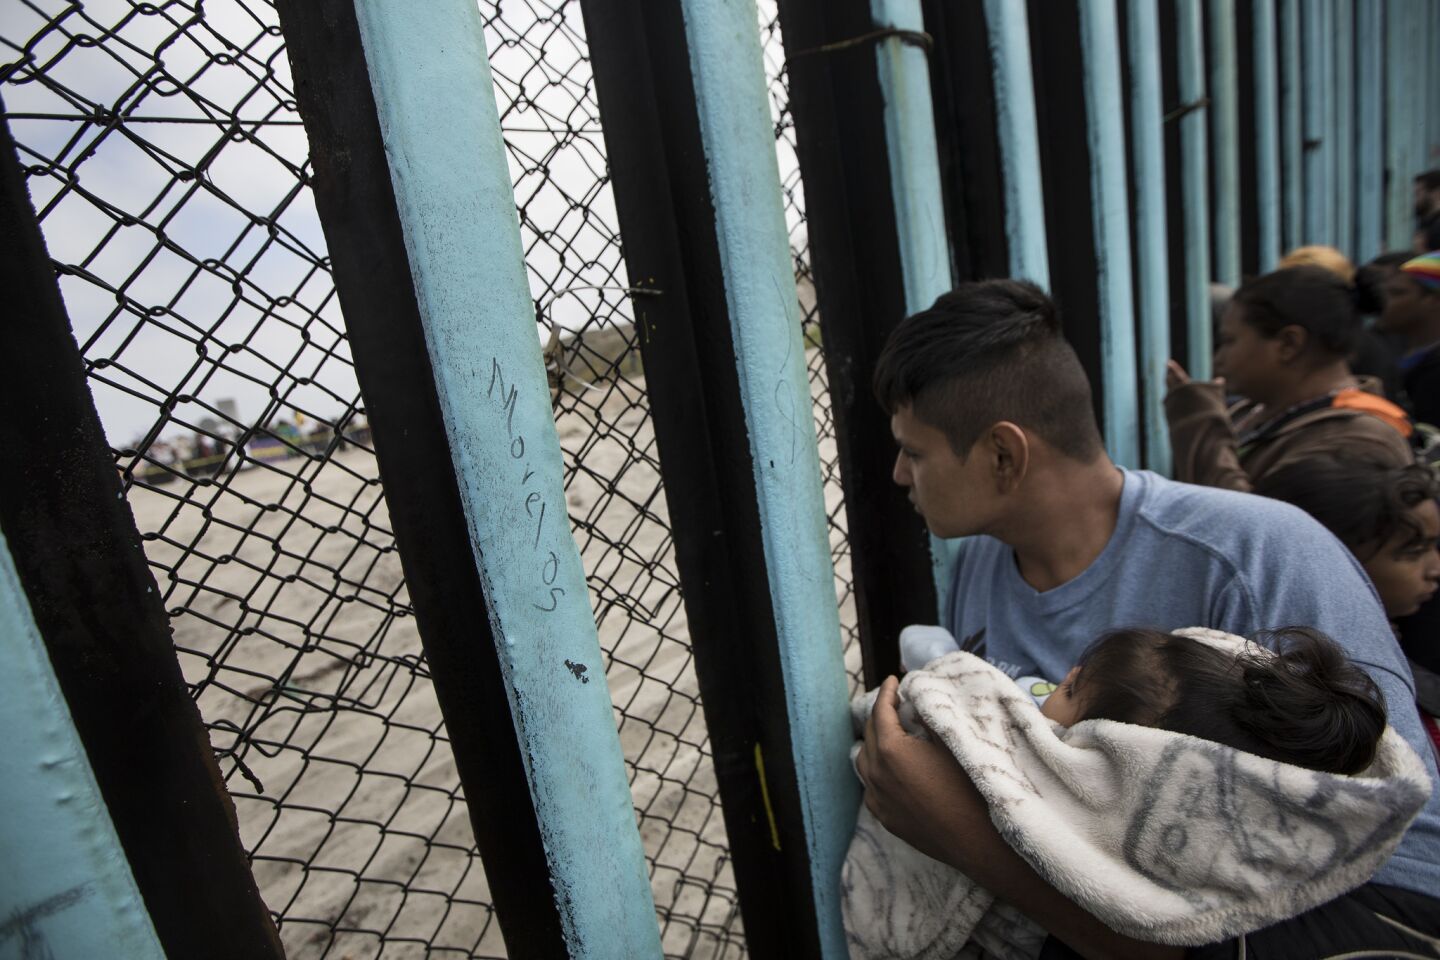 A member of the Central American migrant caravan, cradling a child, looks to the U.S. through the border wall at Tijuana.